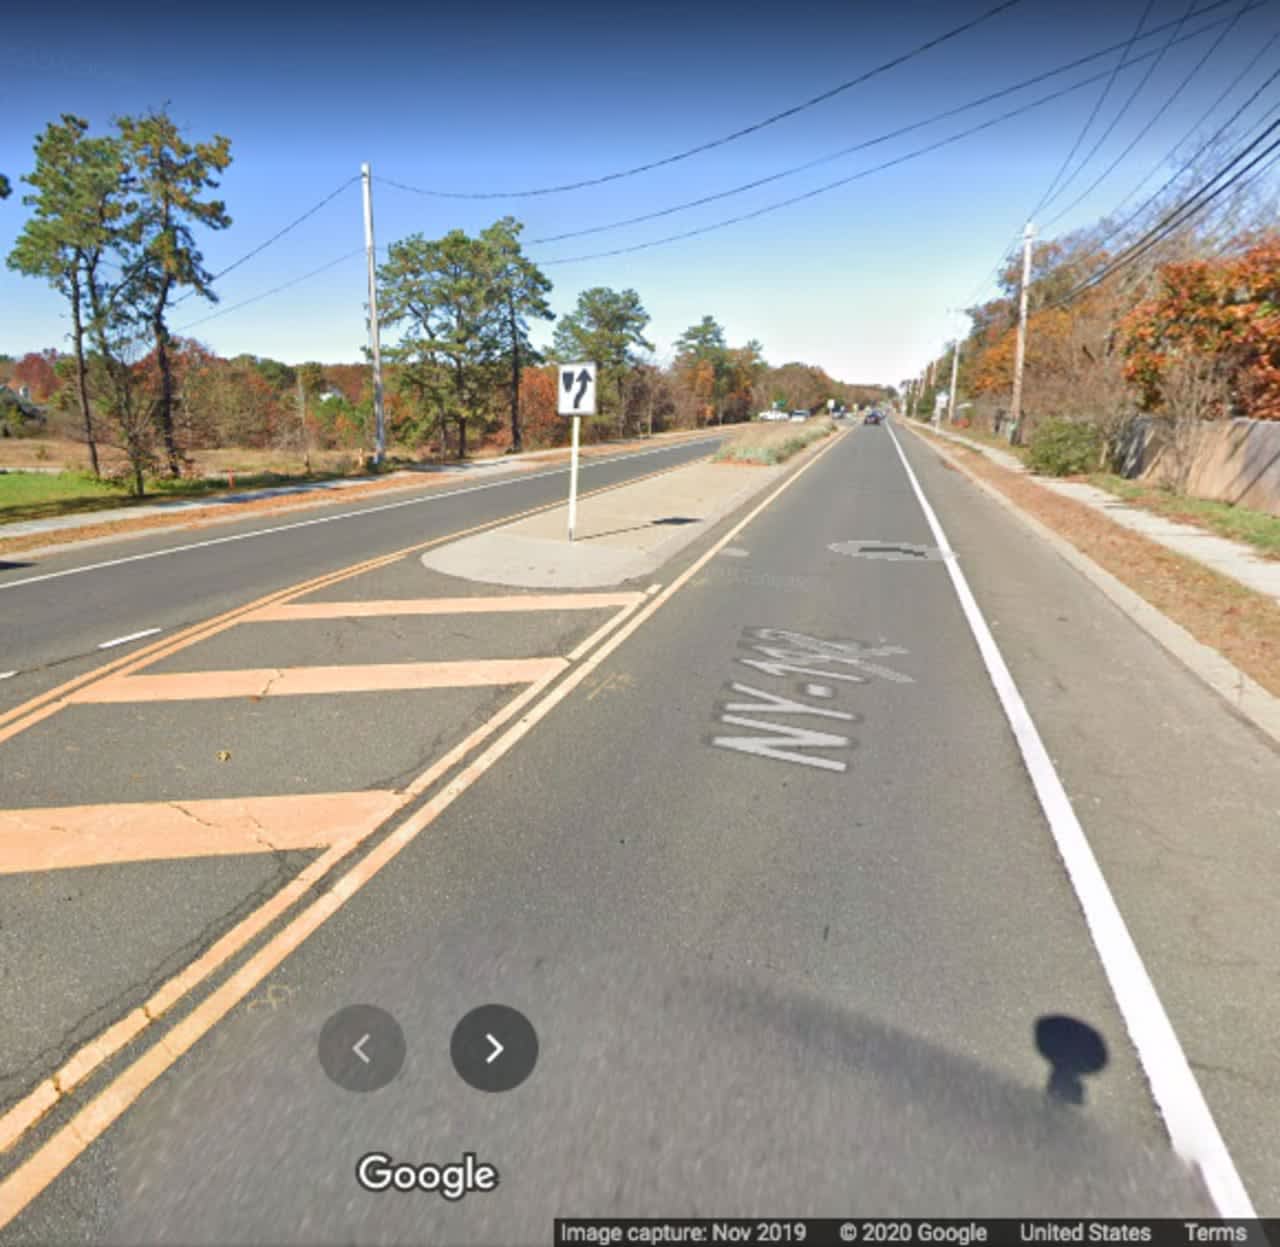 The area of Route 112 in Coram where the crash happened.